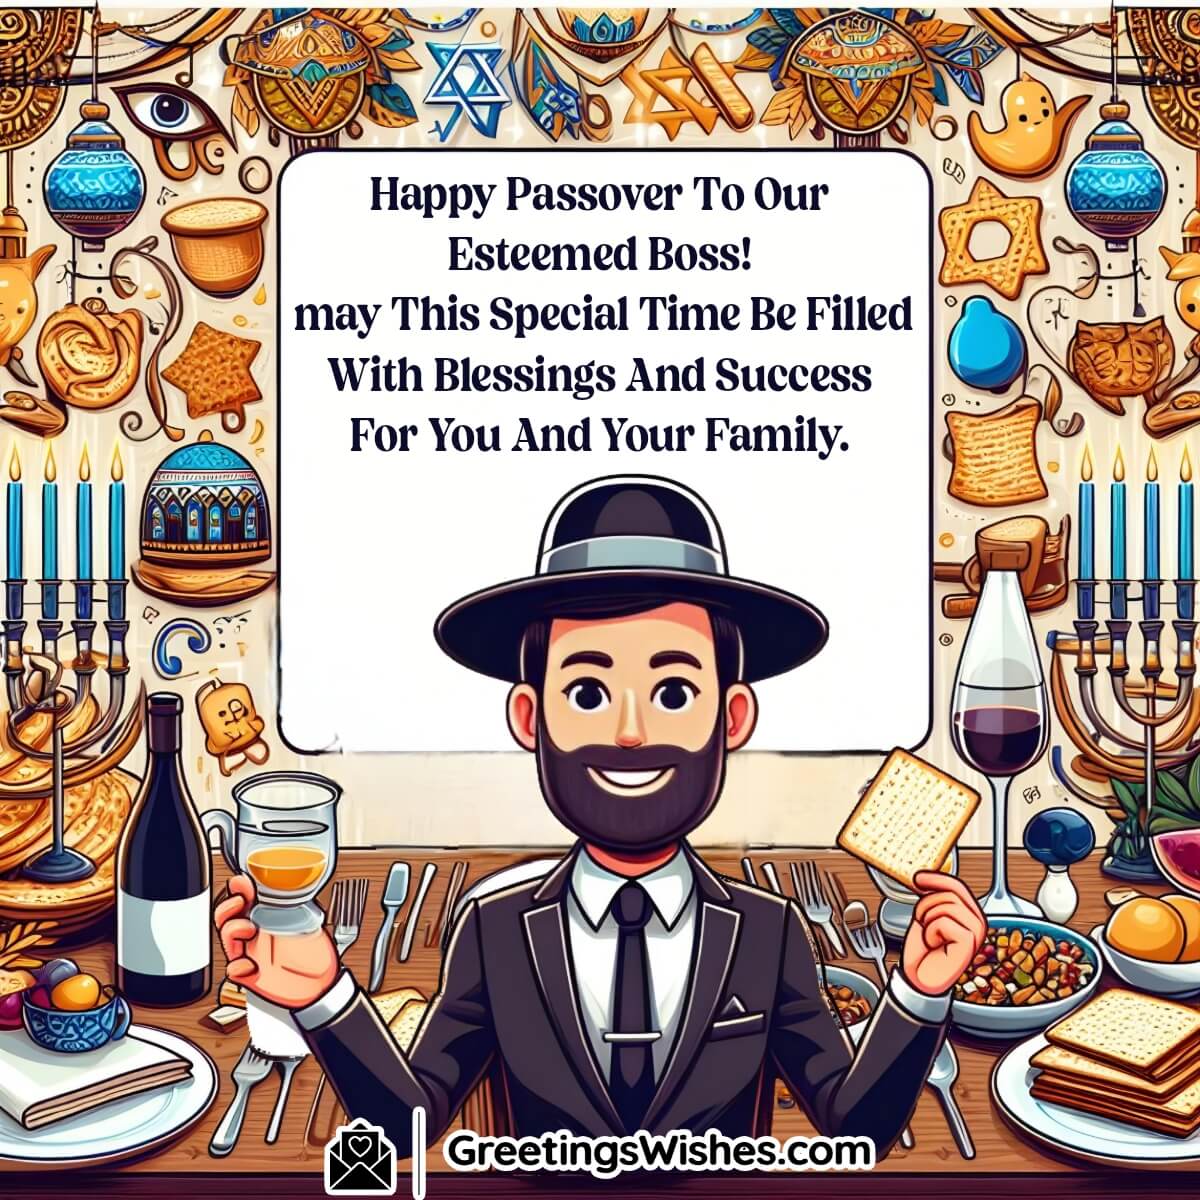 Passover Wishes For Boss